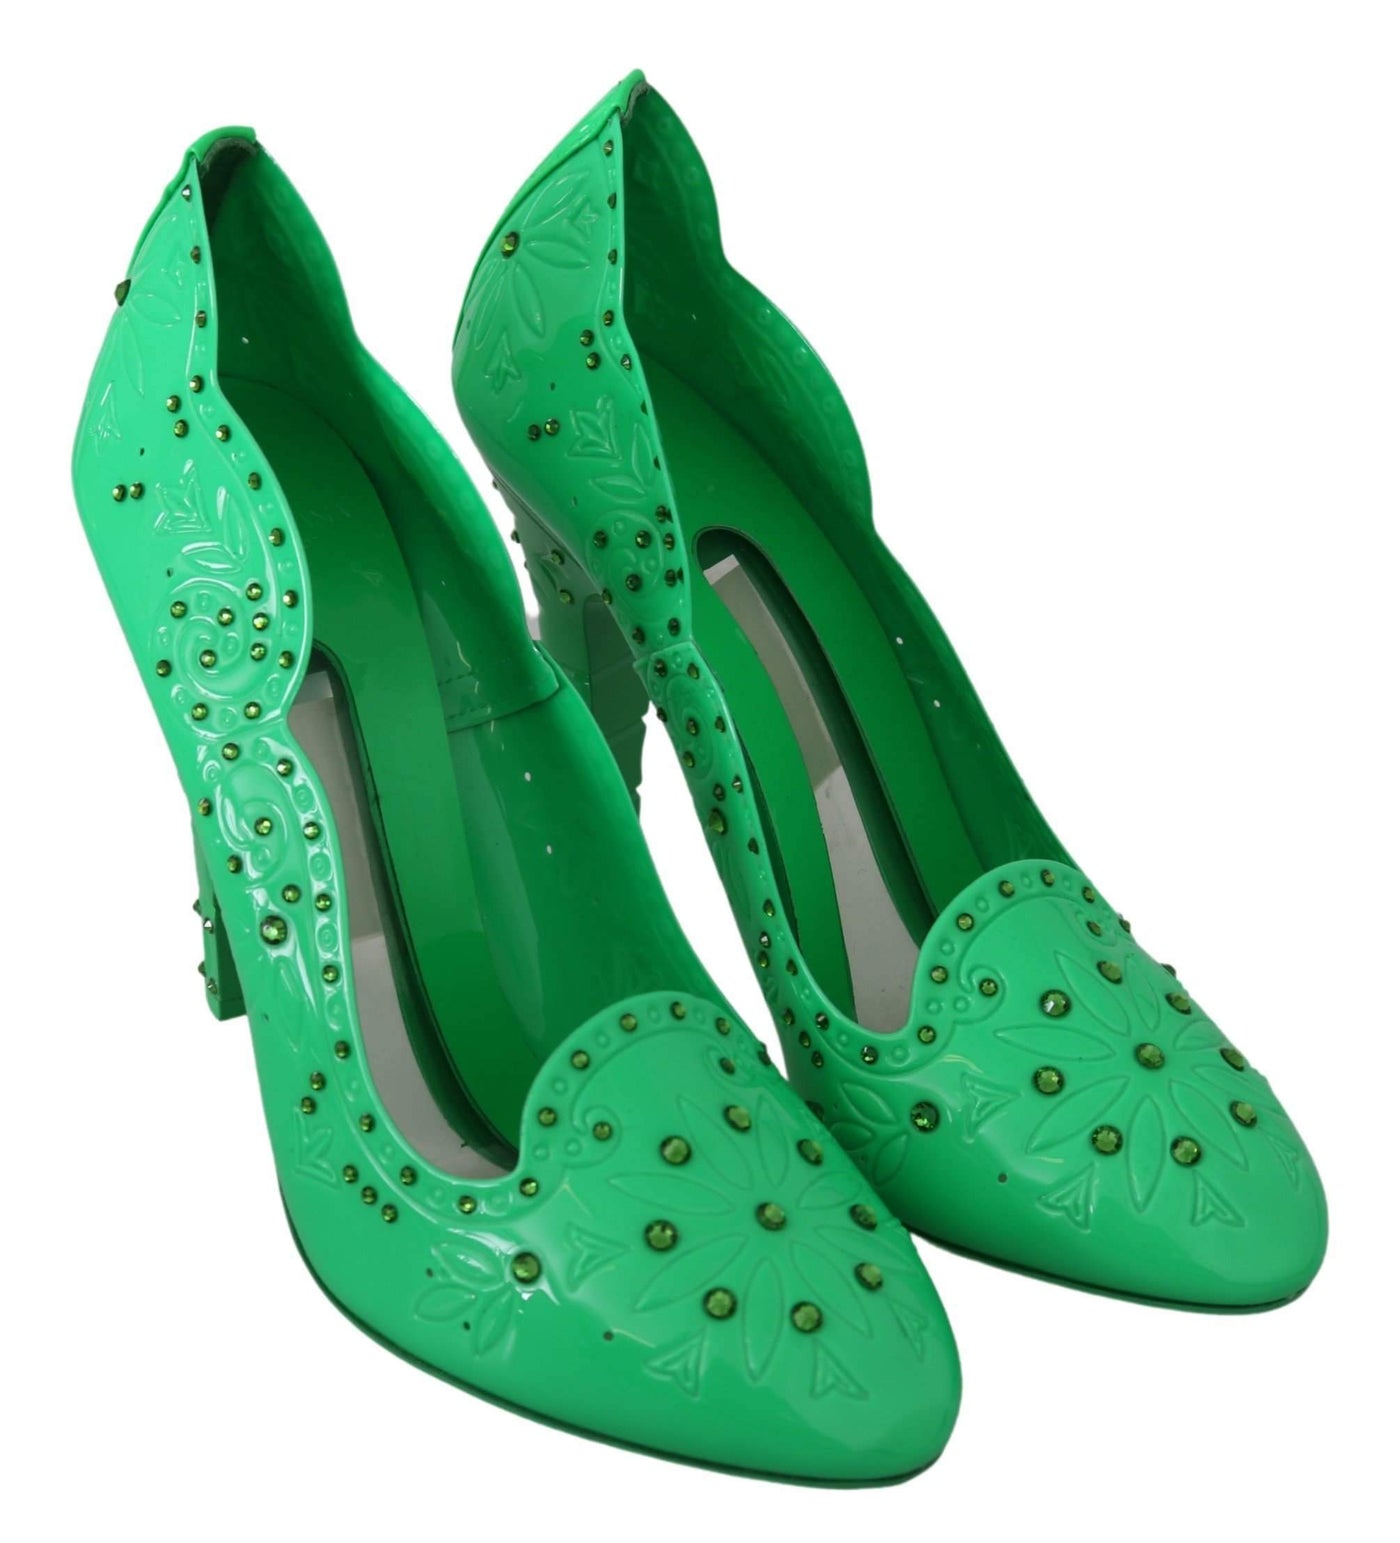 Dolce & Gabbana Green Crystal Floral Heels CINDERELLA Shoes #women, Brand_Dolce & Gabbana, Dolce & Gabbana, EU40/US9.5, feed-agegroup-adult, feed-color-green, feed-gender-female, feed-size-US9.5, Gender_Women, Green, Pumps - Women - Shoes, Shoes - New Arrivals at SEYMAYKA